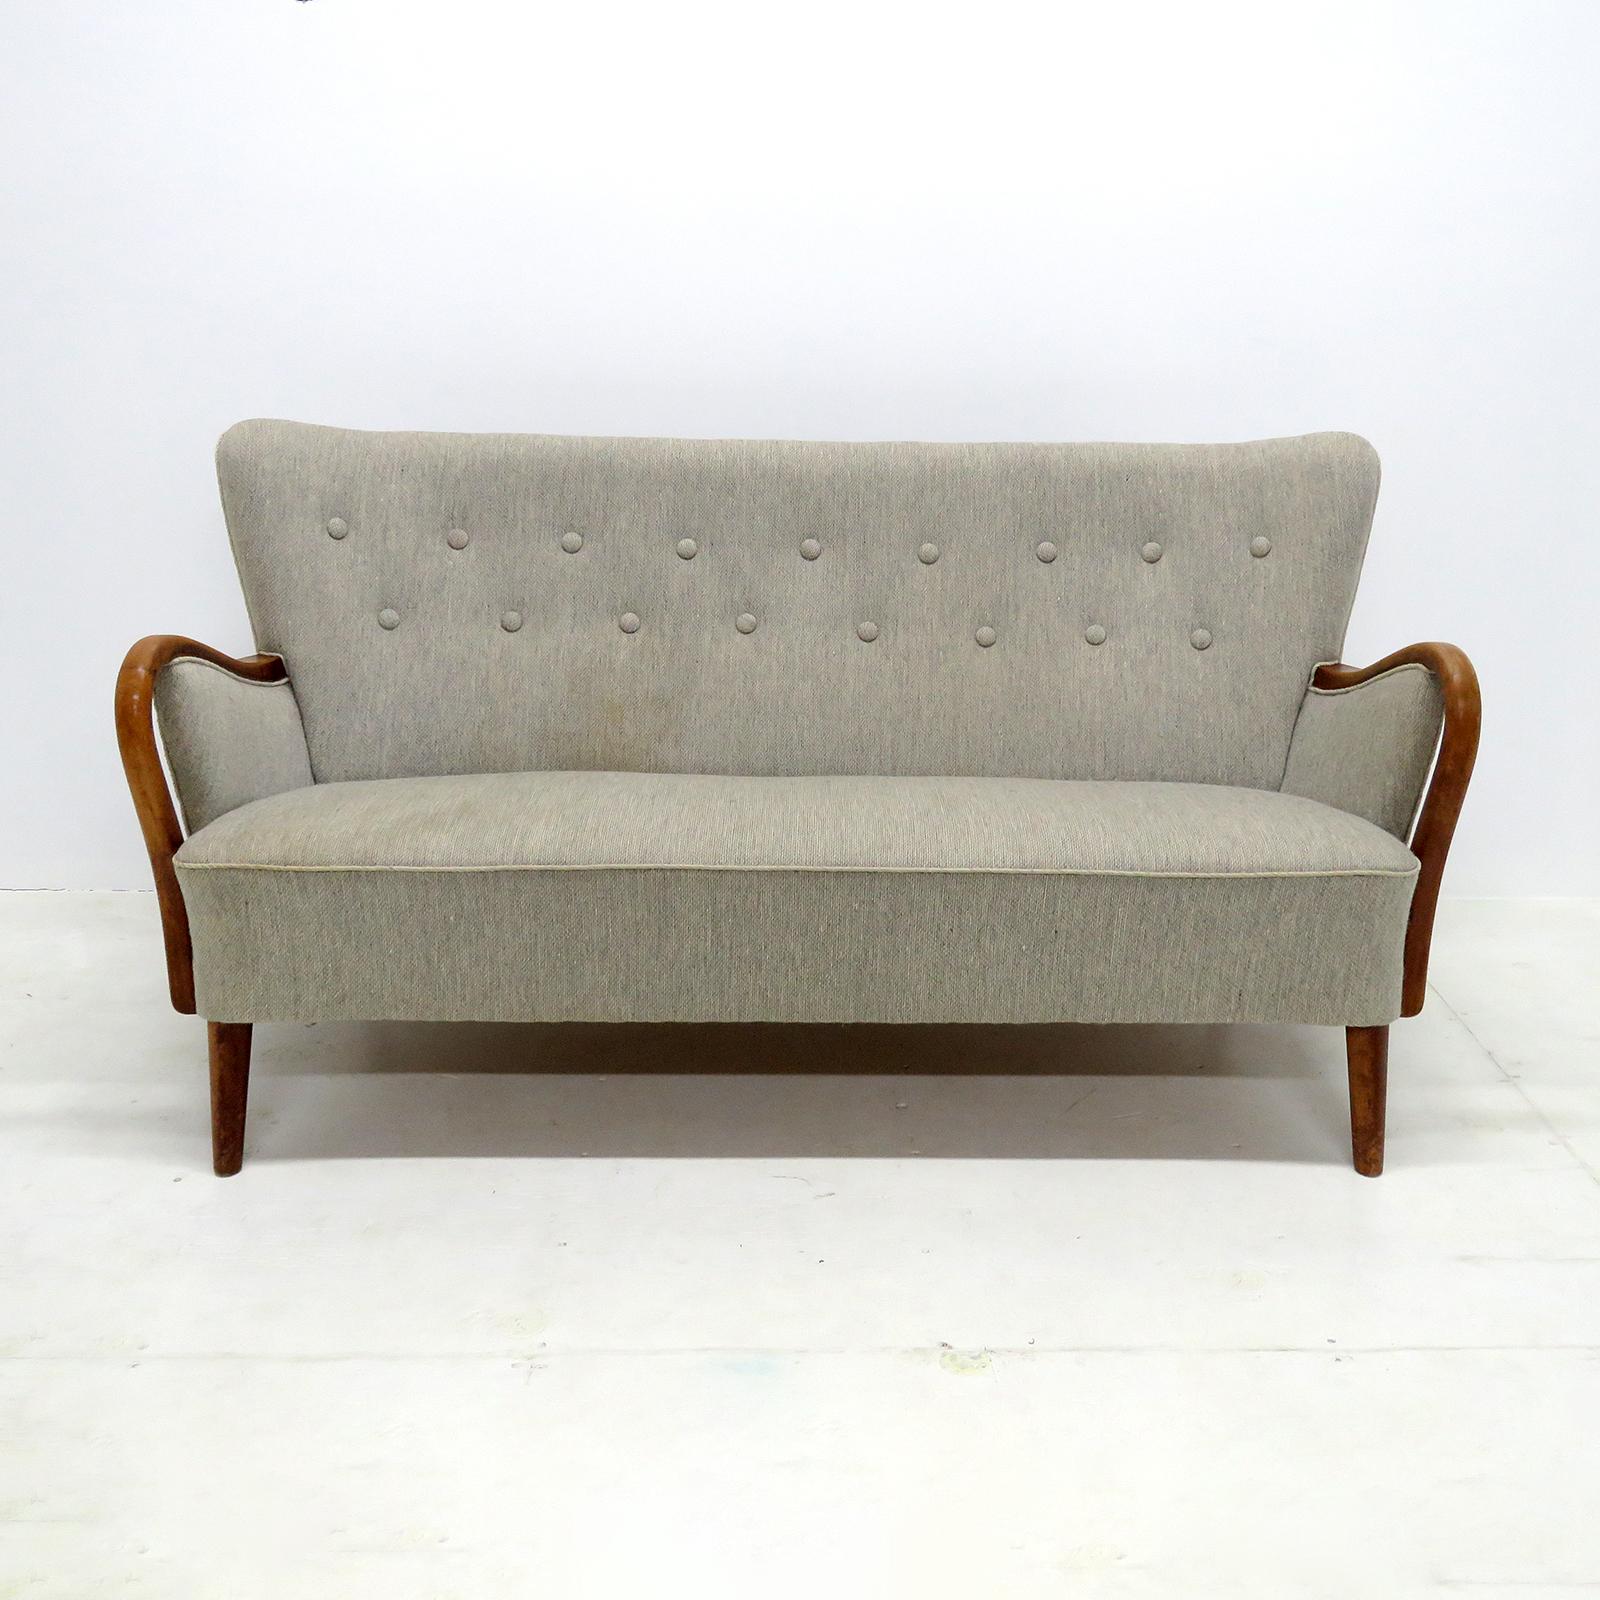 Wonderful Danish modern sofa, settee by DUX, sculptural stained and lacquered beech frame with a grey wool upholstered body, The concave wing-back is tufted and the seat is spring supported.